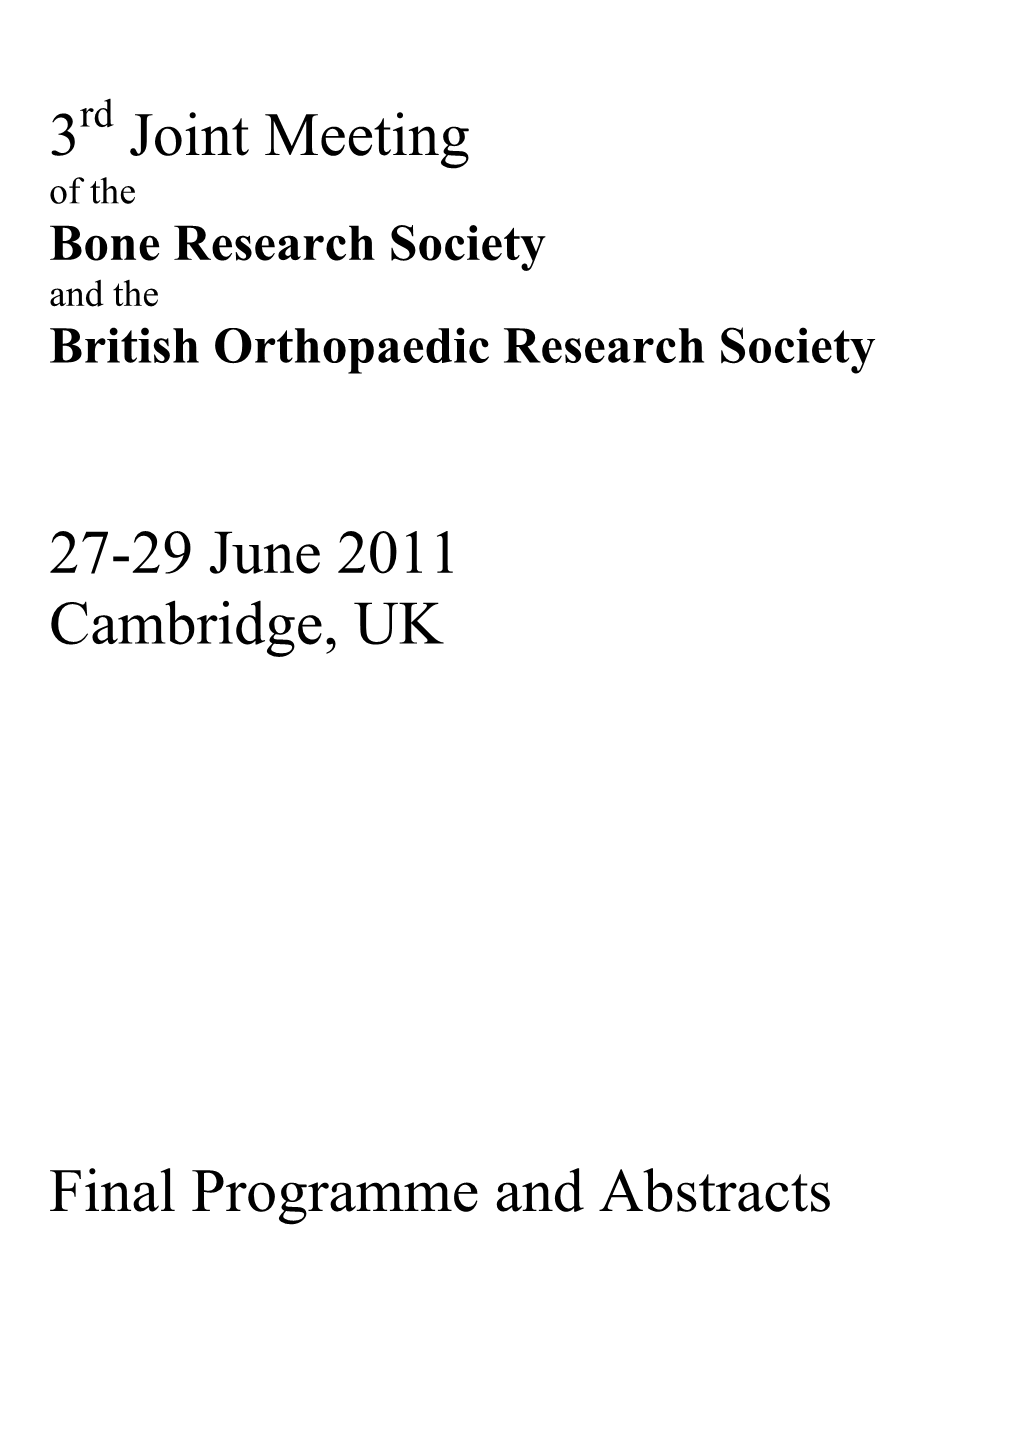 BRS Annual Meeting Programme & Abstracts 2011